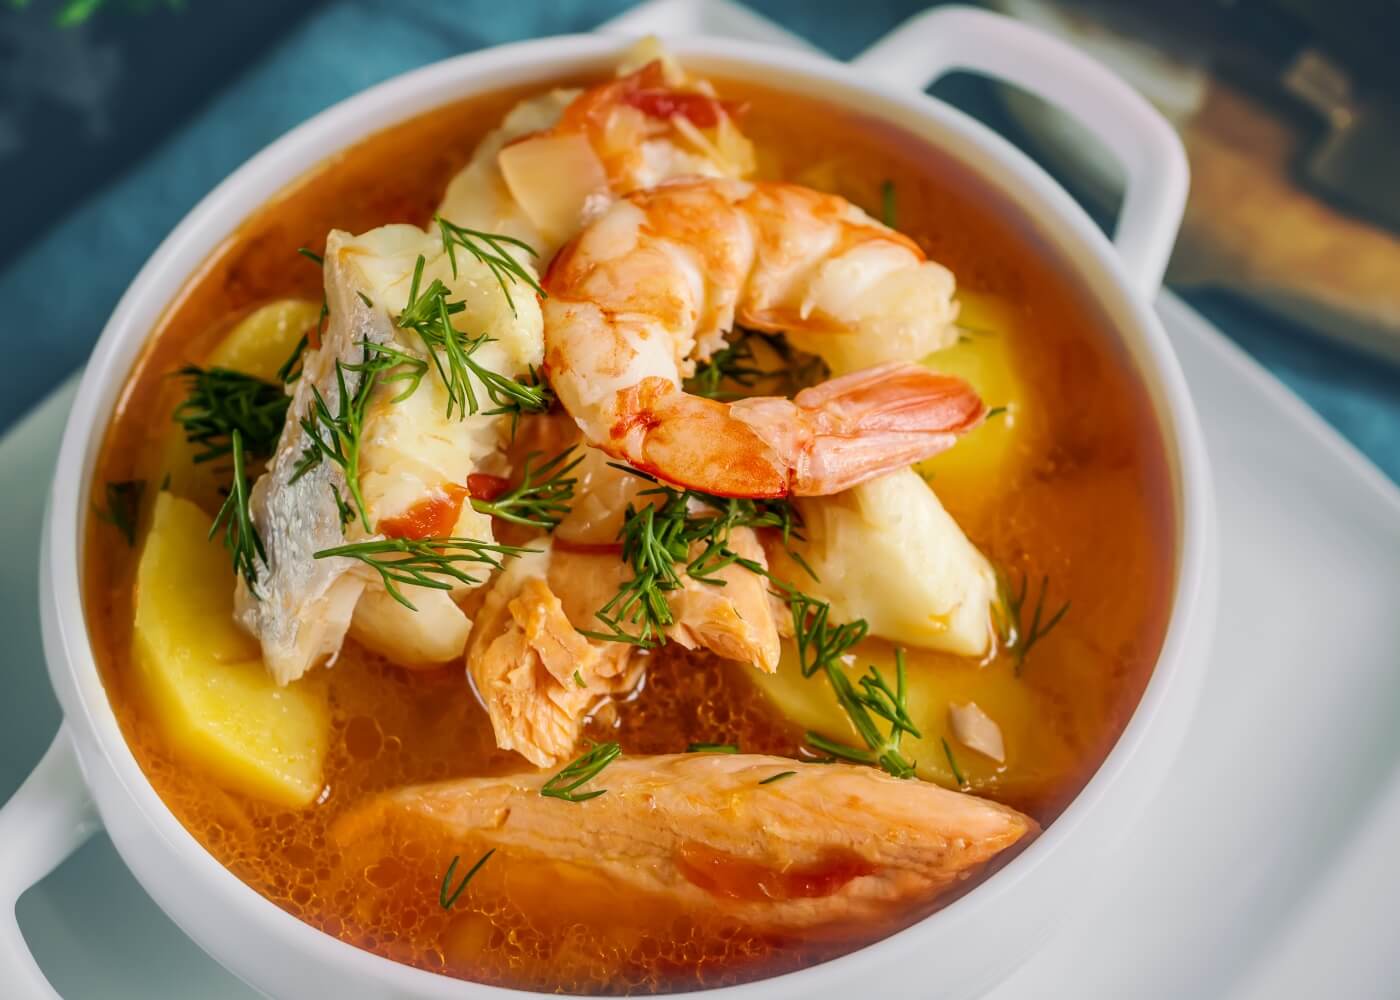 Caldeirada is a Portuguese fish stew made with wide variety of fish and potatoes, along with other ingredients.